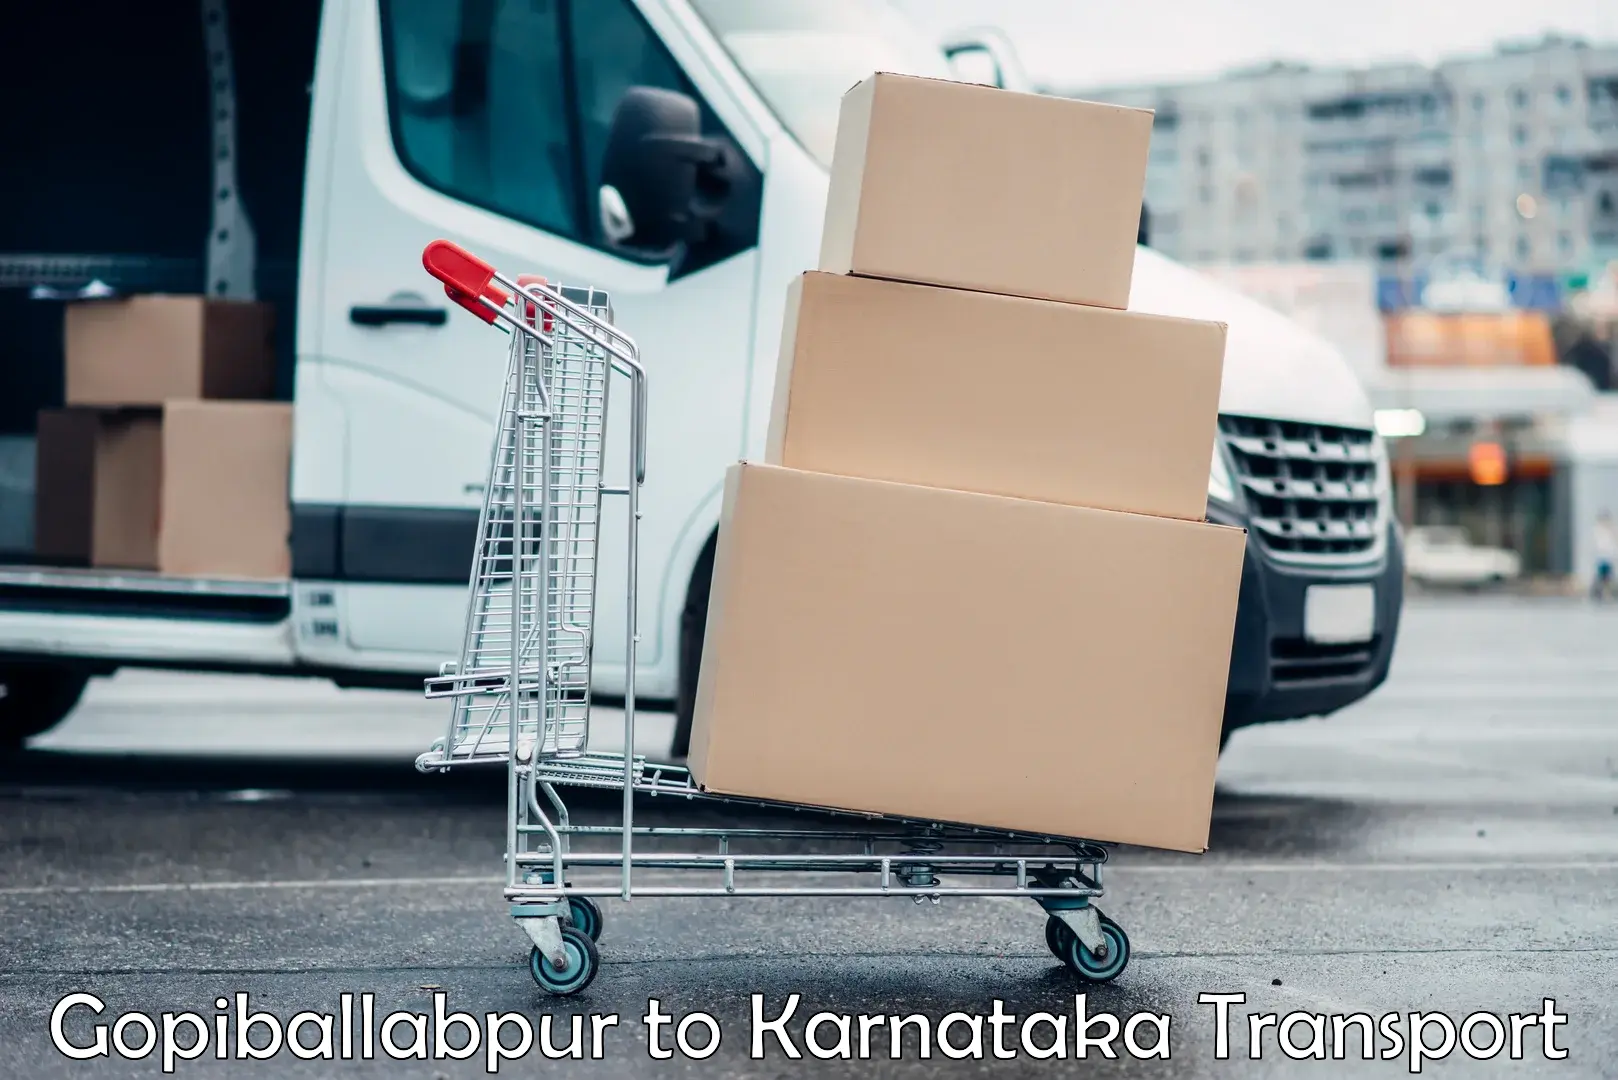 Package delivery services Gopiballabpur to Maddur